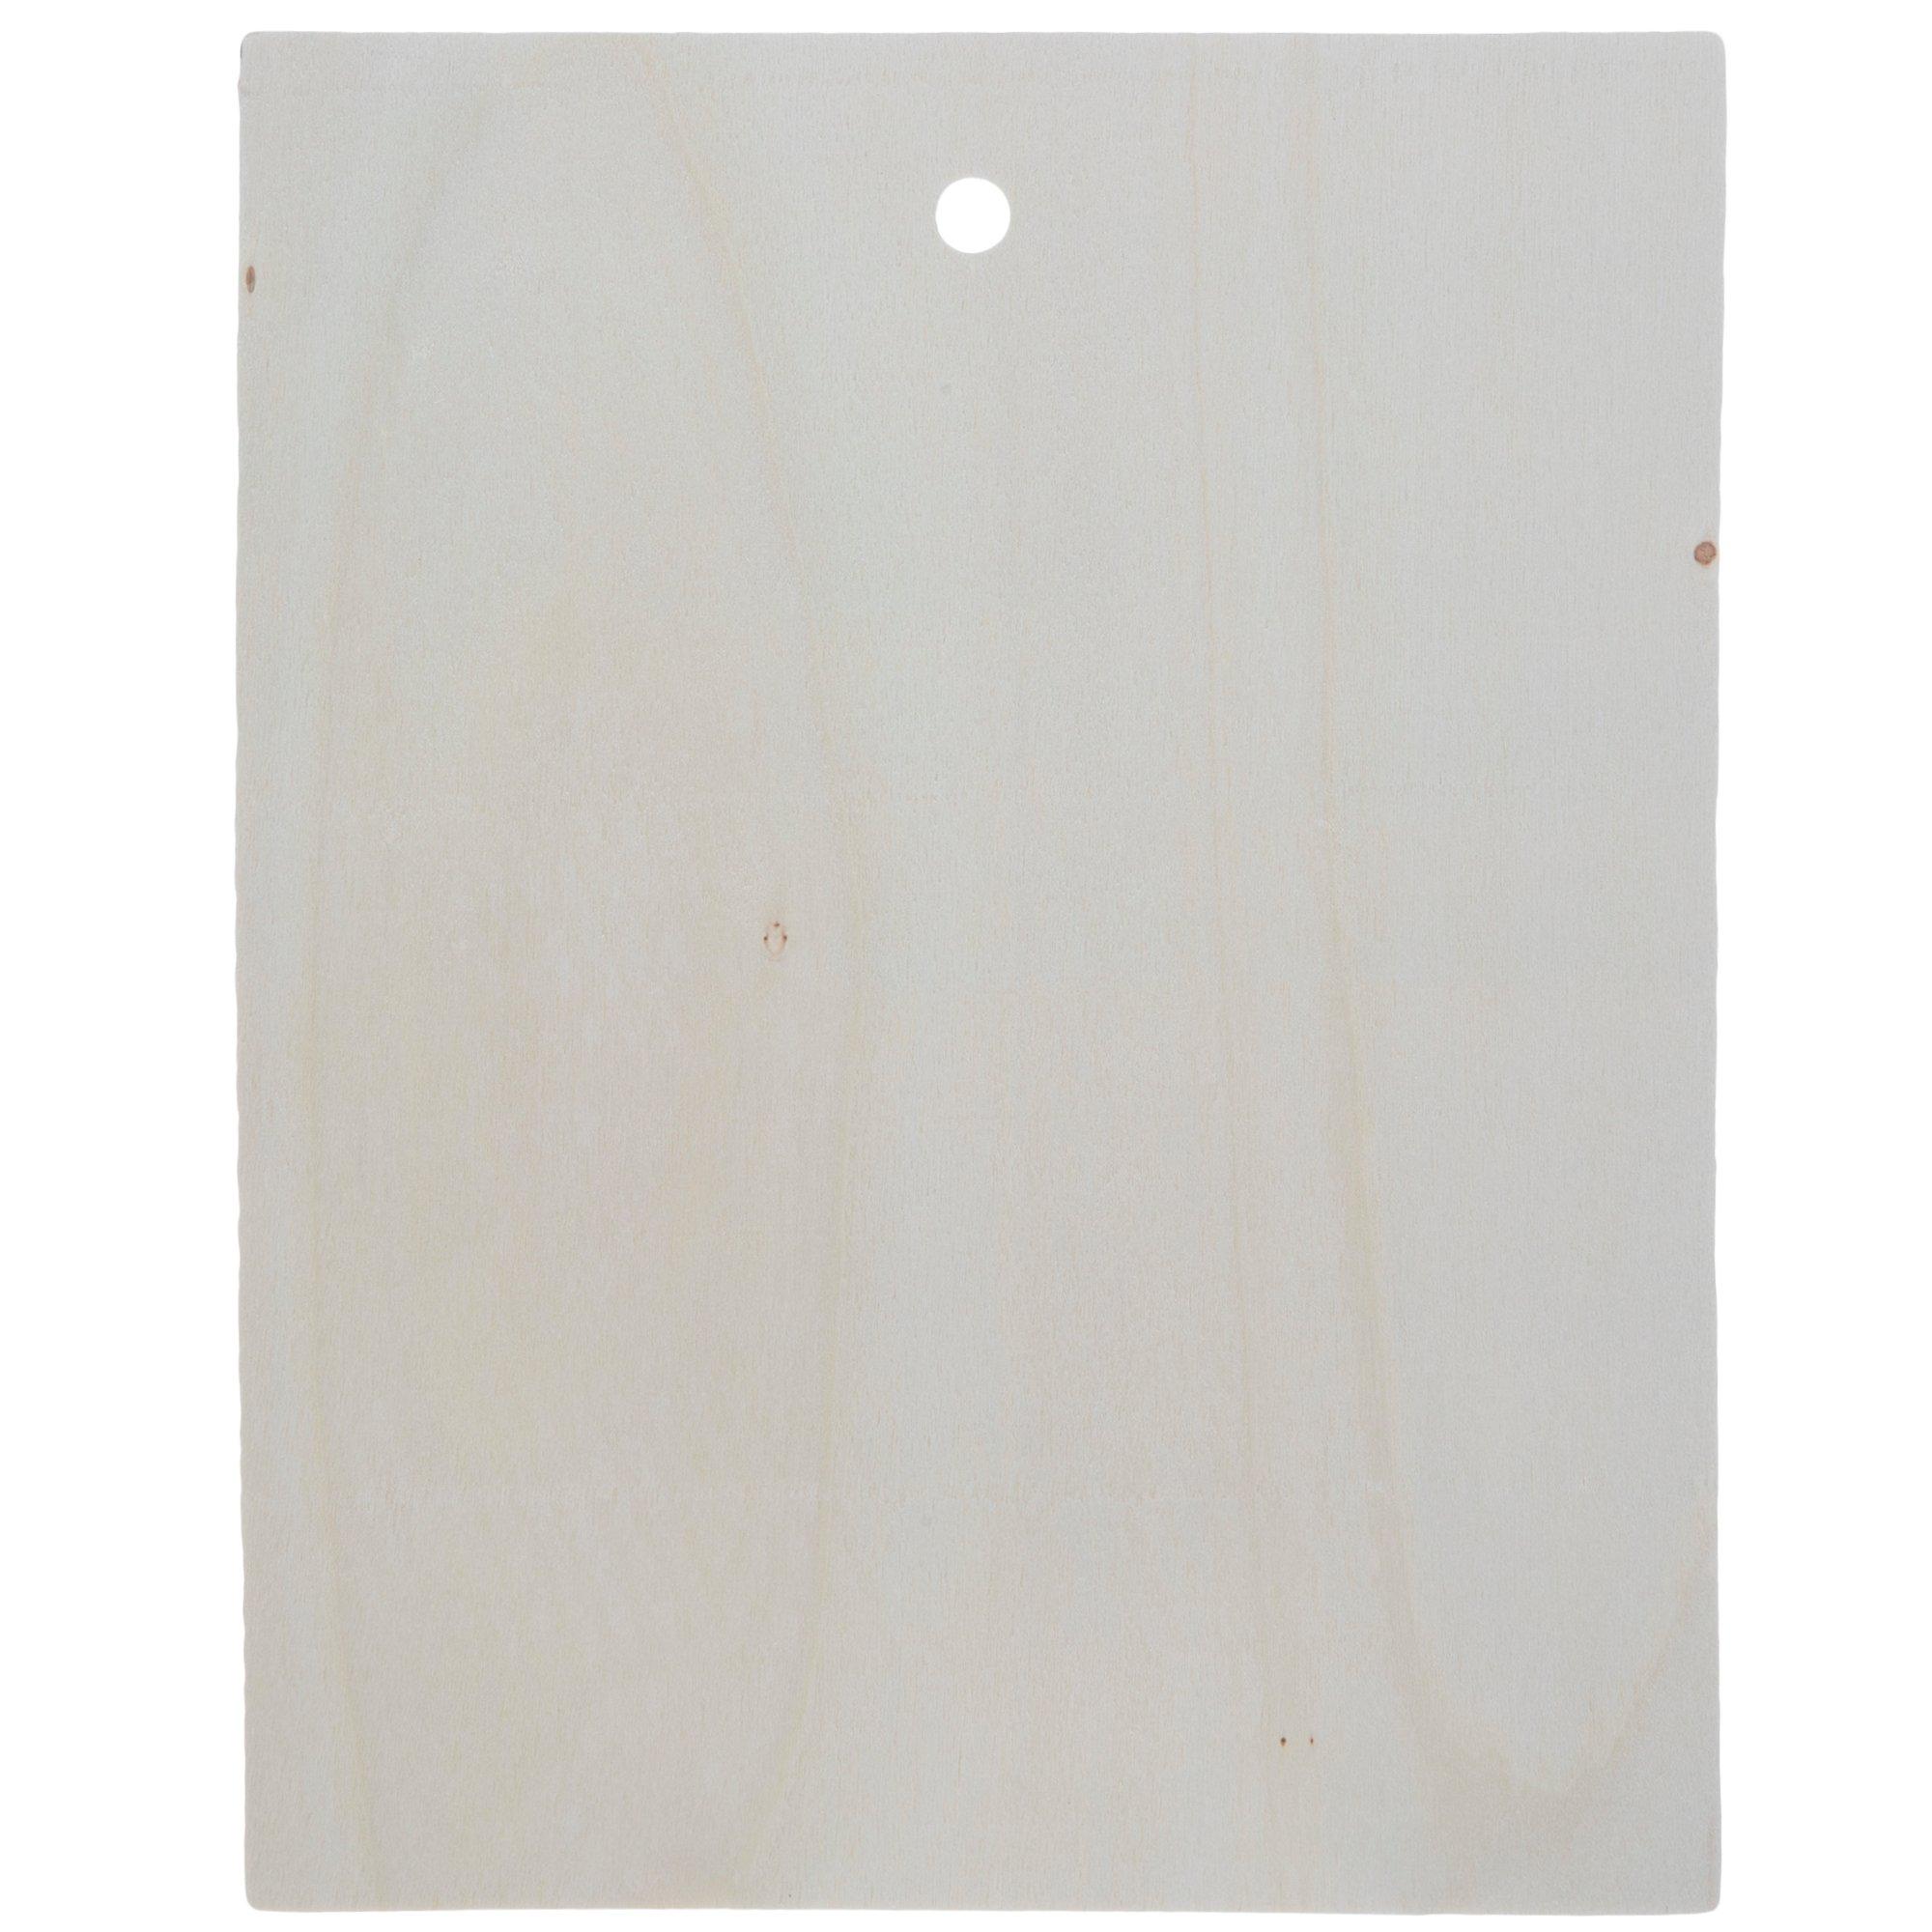 Darware Blank Wood Plaques (2-Pack, Whitewashed), White